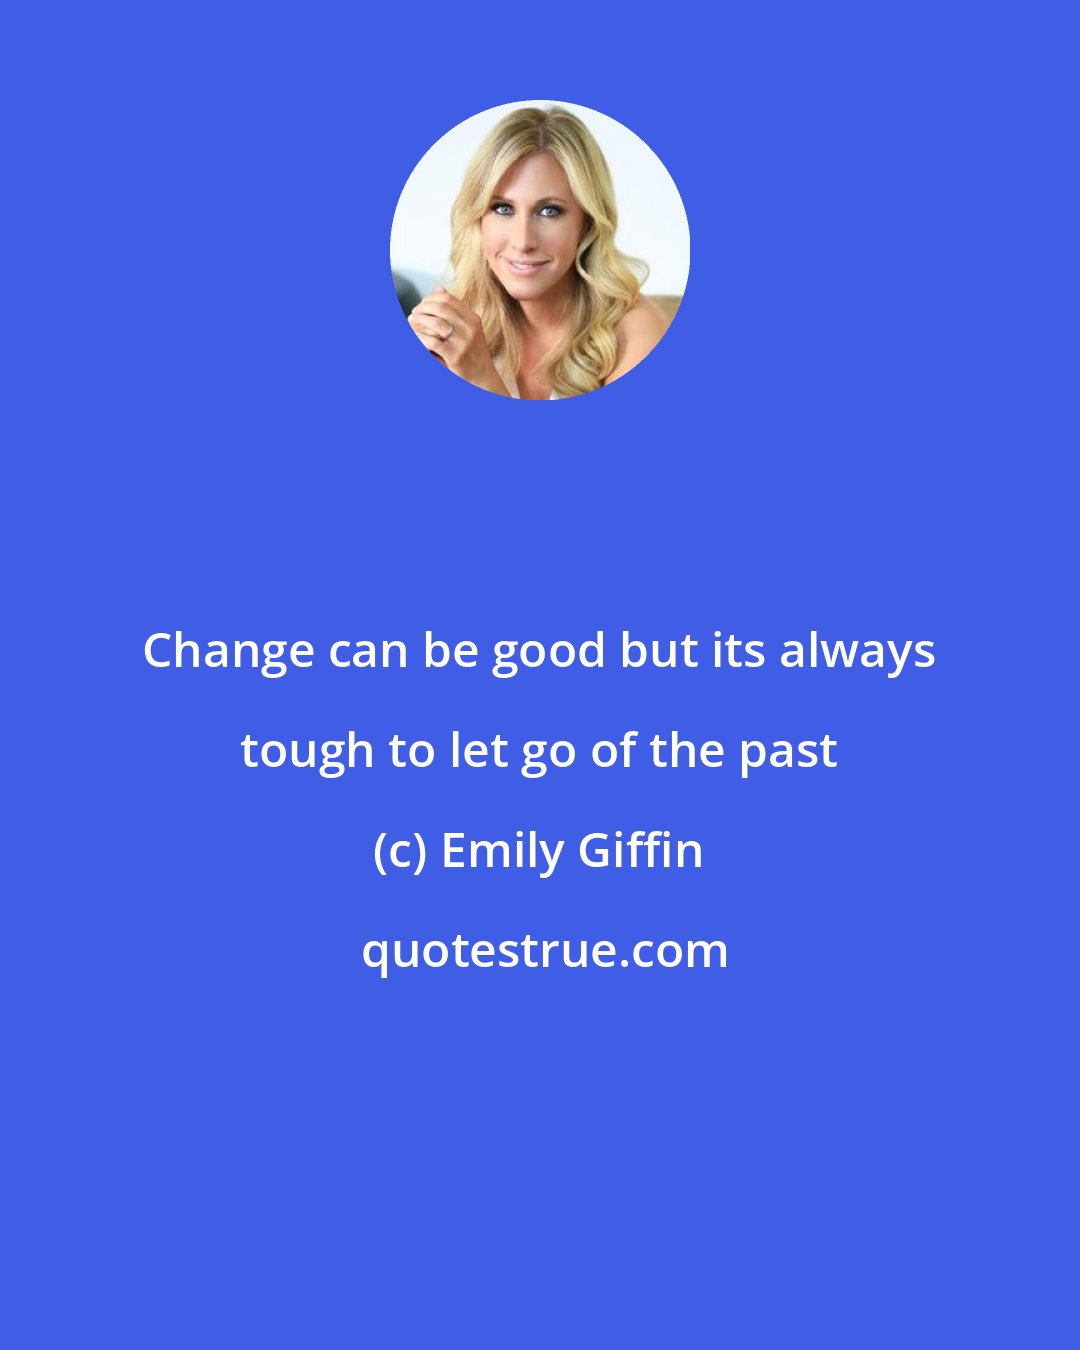 Emily Giffin: Change can be good but its always tough to let go of the past